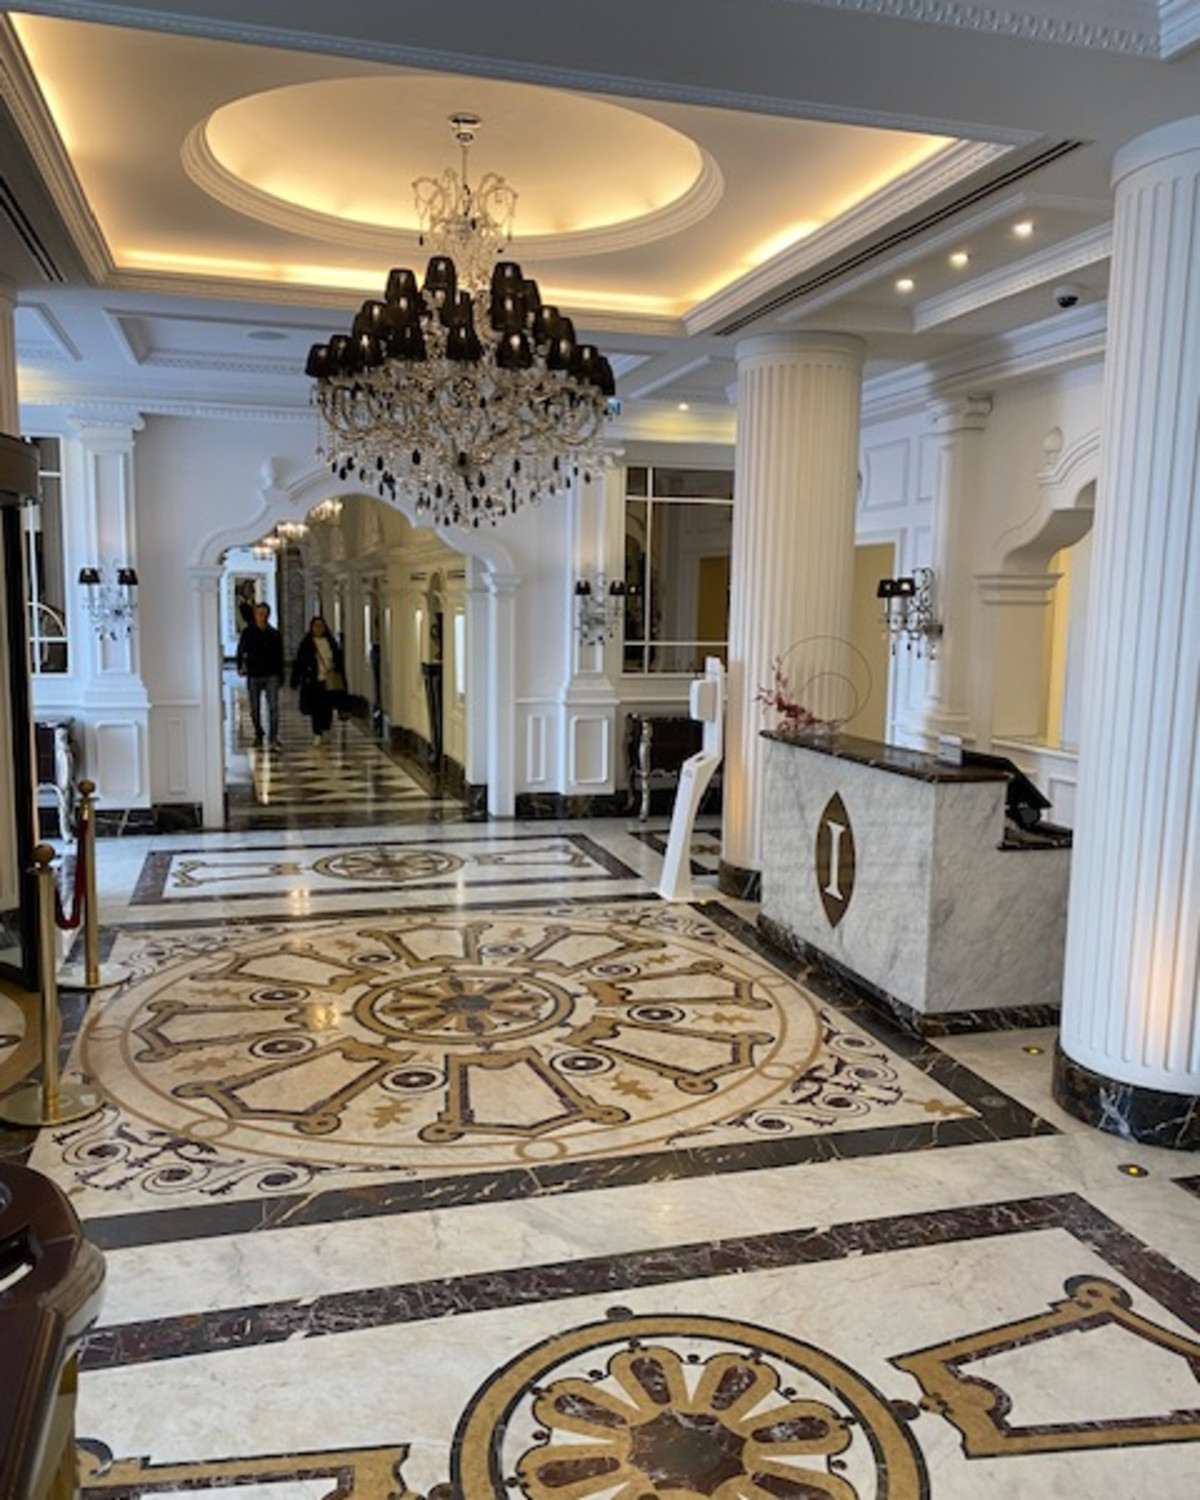 View of hotel lobby